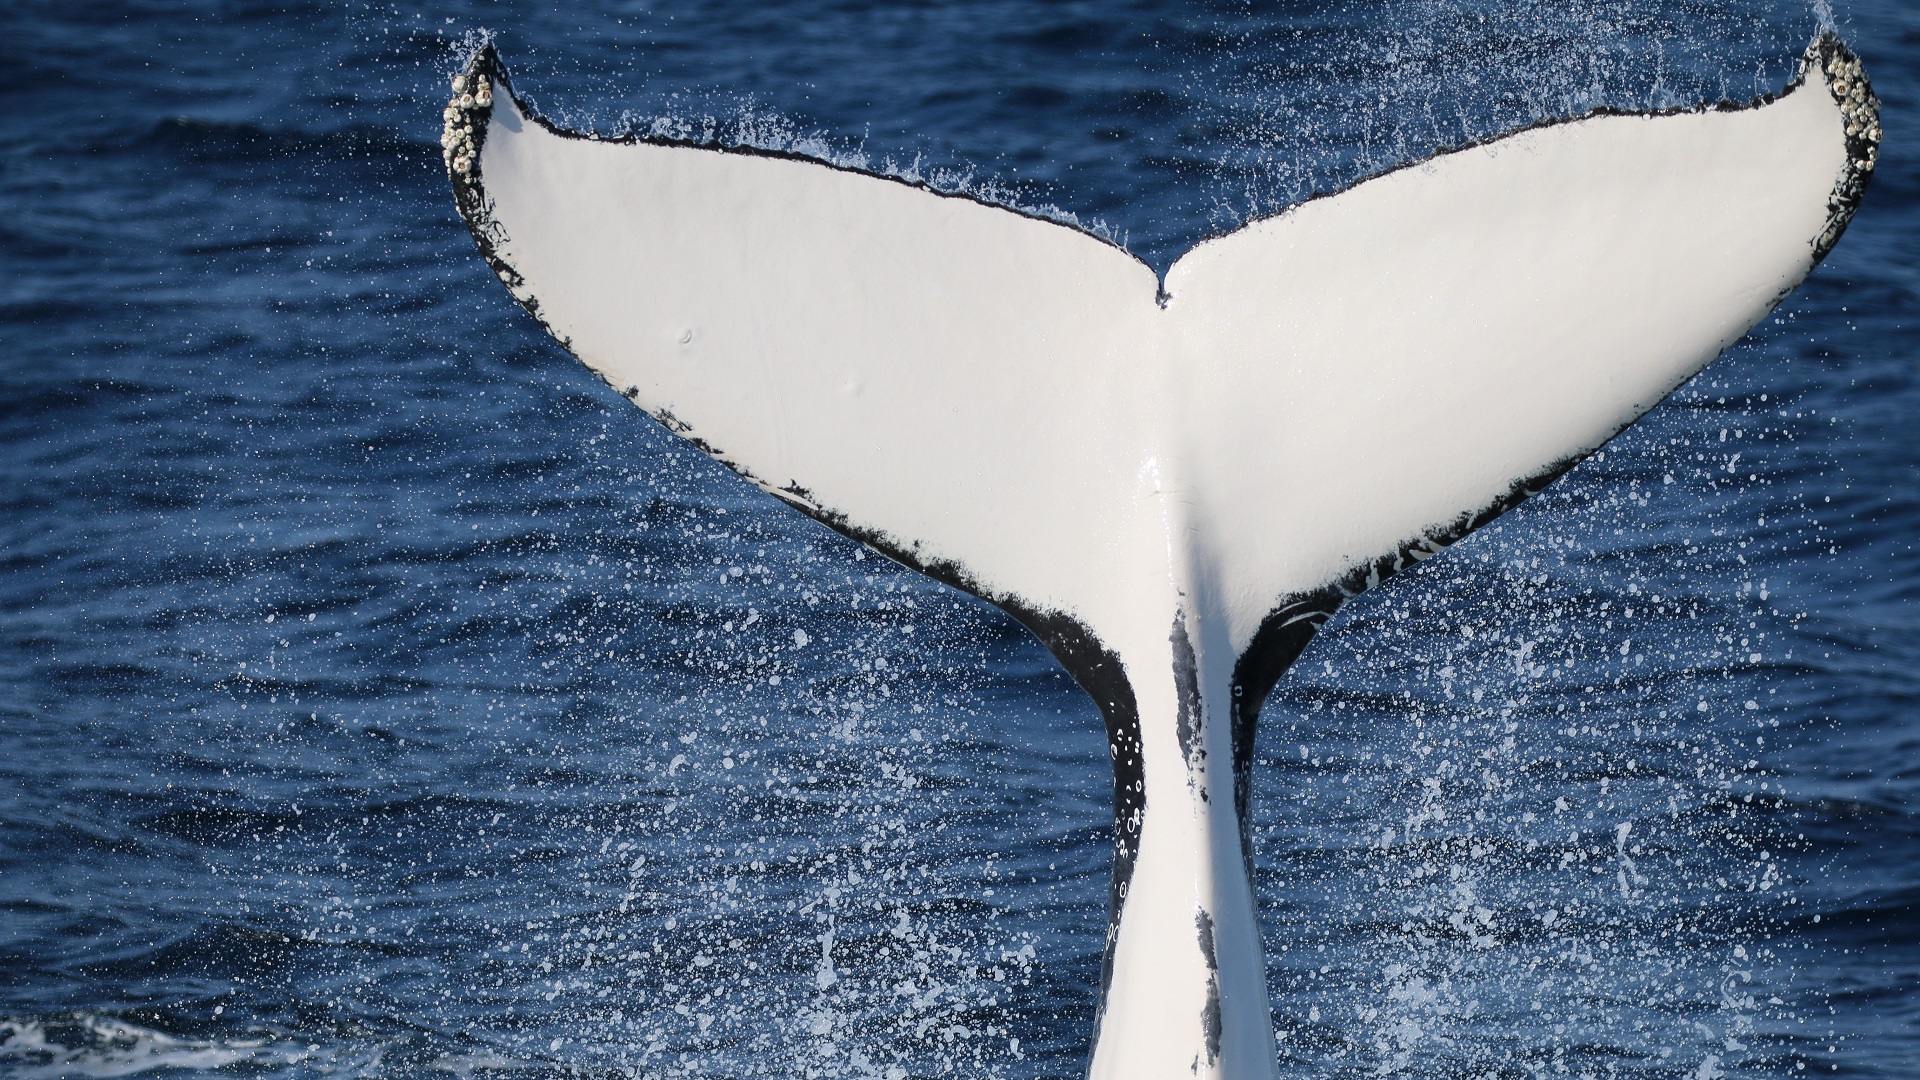 Citizen science project turns whale watchers into published scientists